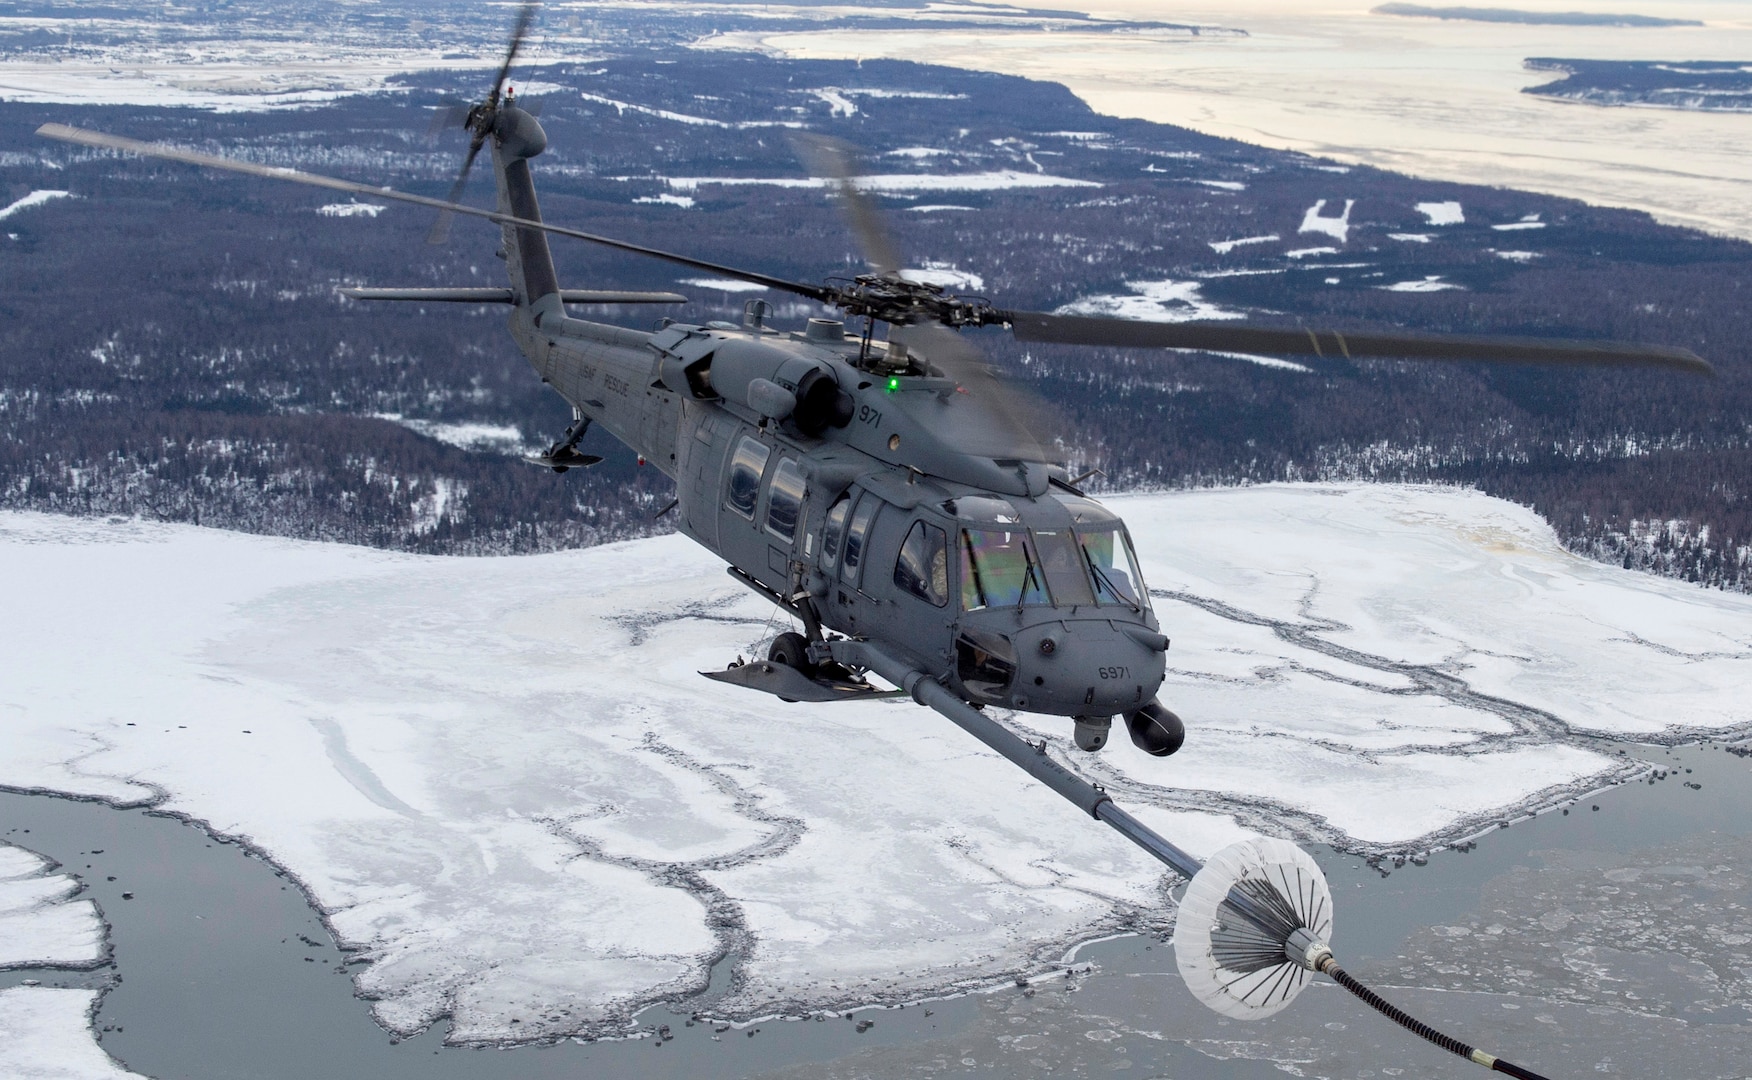 A U.S Air Force HH-60G Pave Hawk helicopter assigned to the 210th Rescue Squadron, Alaska Air National Guard, conducts aerial refueling from a U.S. Air Force HC-130J Combat King II assigned to the 211th Rescue Squadron, Alaska Air National Guard, over Alaska, Jan. 21, 2021, during Operation Noble Defender. Operation Noble Defender is a North American Air Defense Command air-defense operation that allows dynamic training for operational readiness in an Arctic environment.